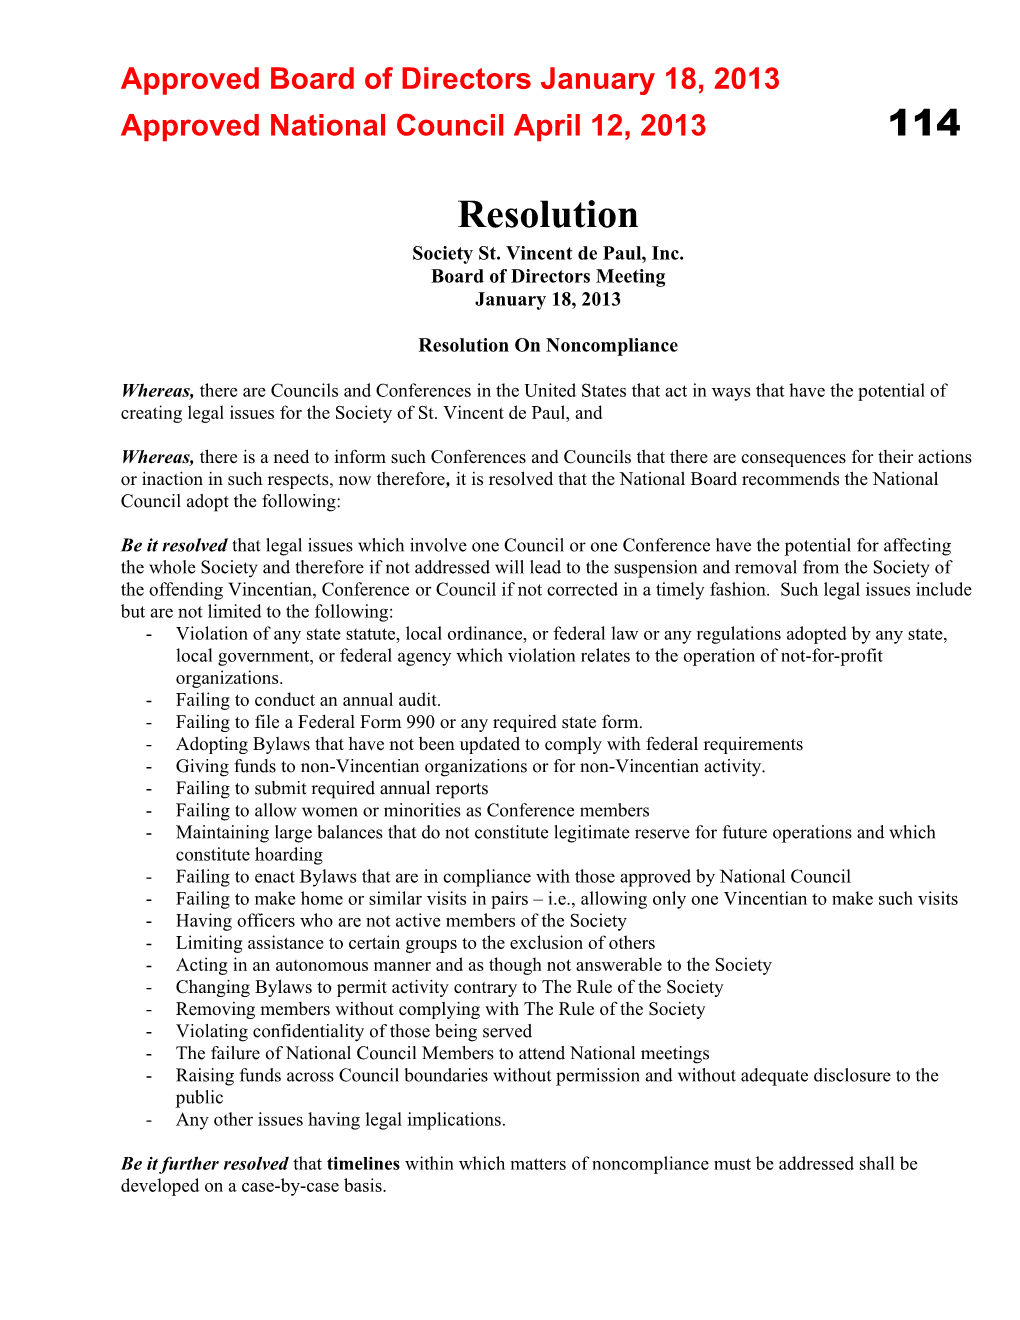 Resolution on Noncompliance